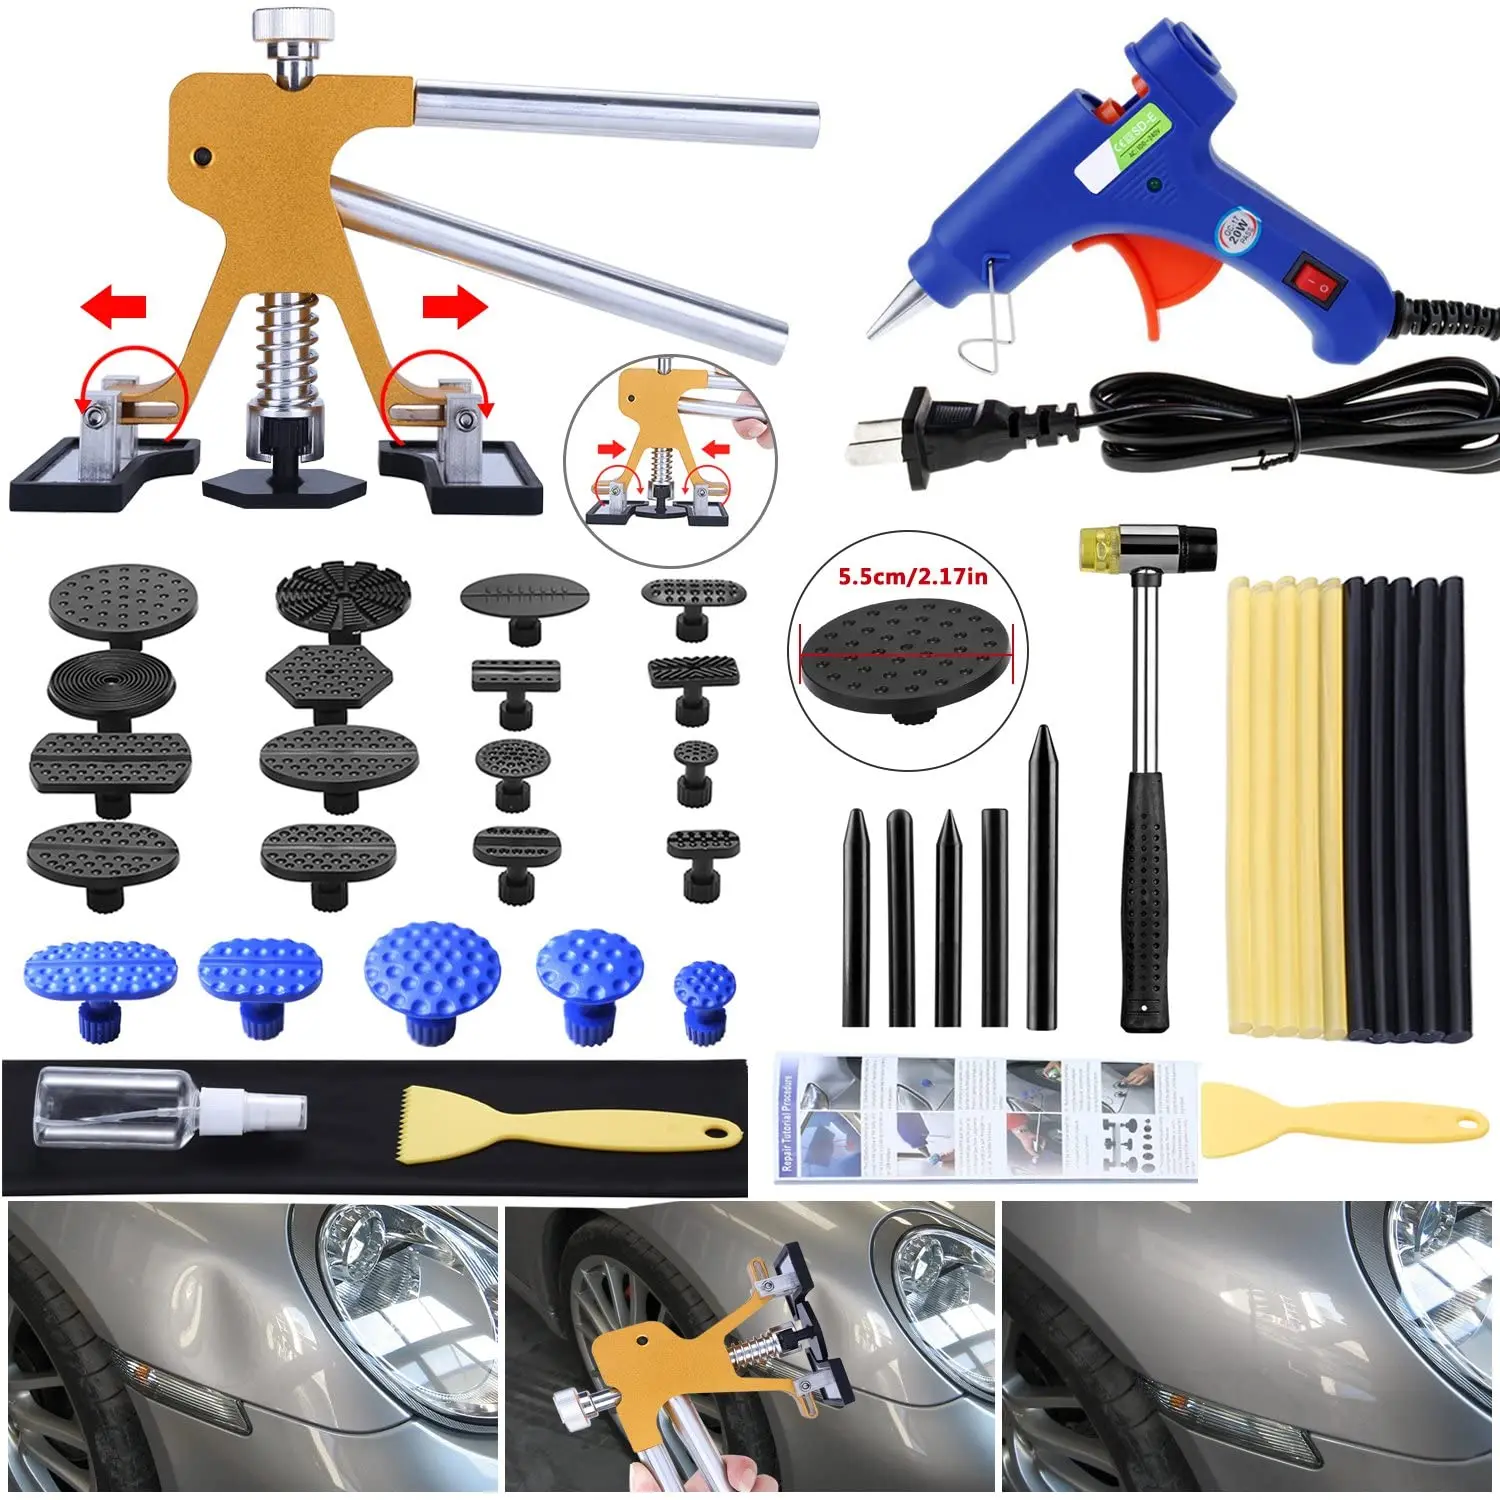 Paintless Dent Puller DIY Auto Body Dent Repair 43pcs Dent Remover Tools with Adjustable Width Dent Repair Tools for Car Golden Dent Puller Kit 